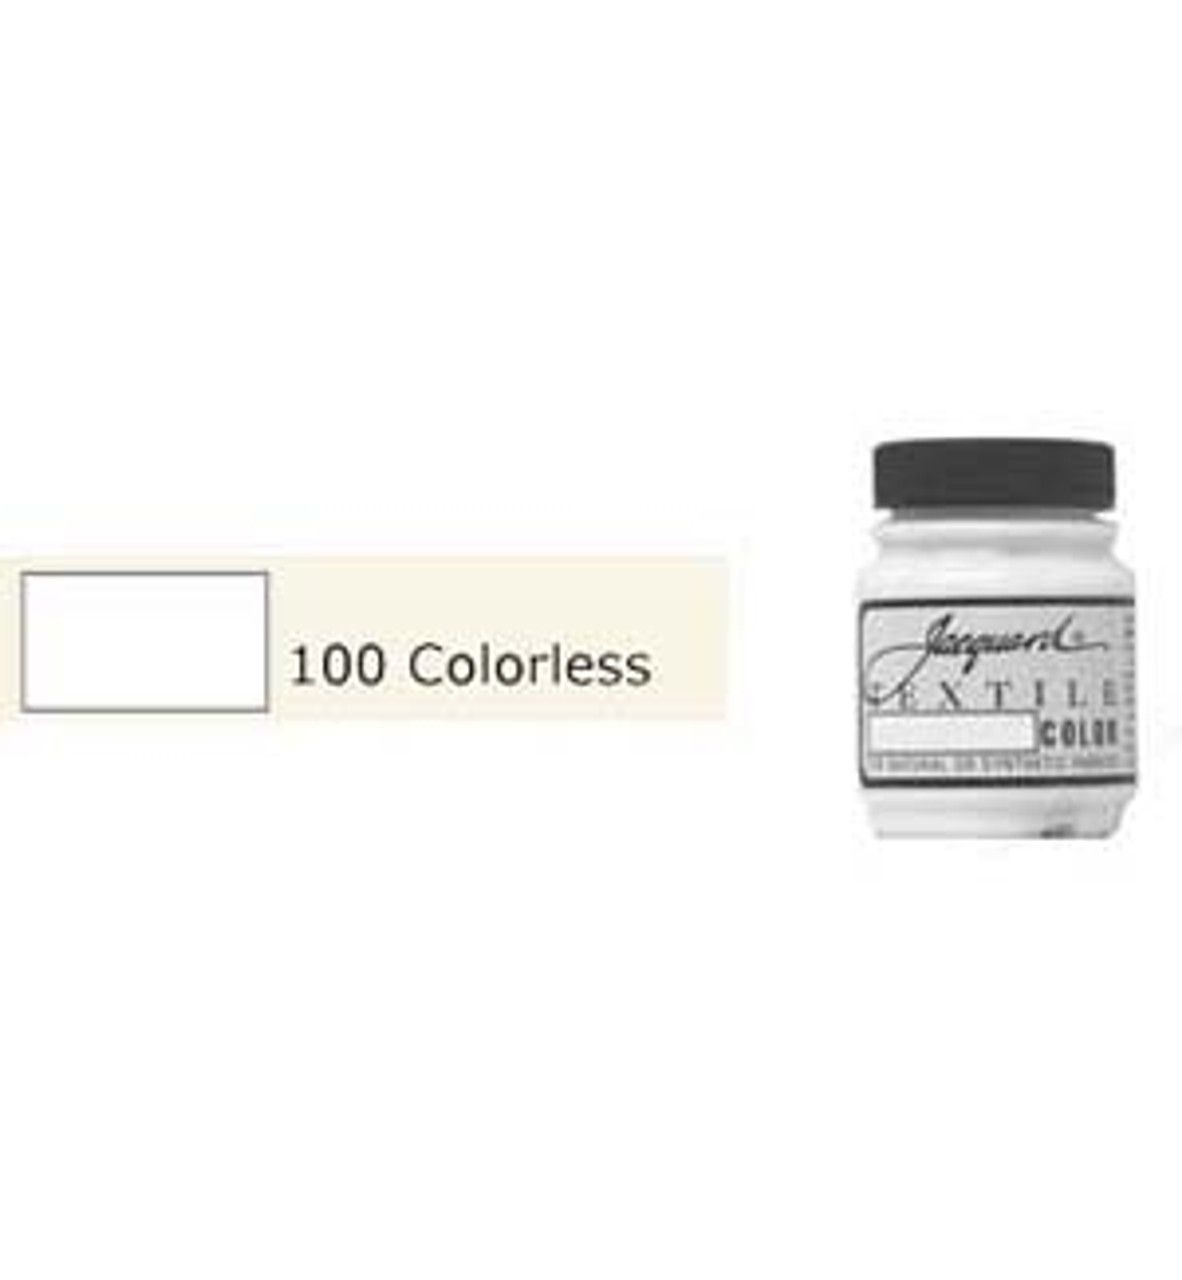 Jacquard Textile Paint 70ml Colorless Extender - Wet Paint Artists'  Materials and Framing